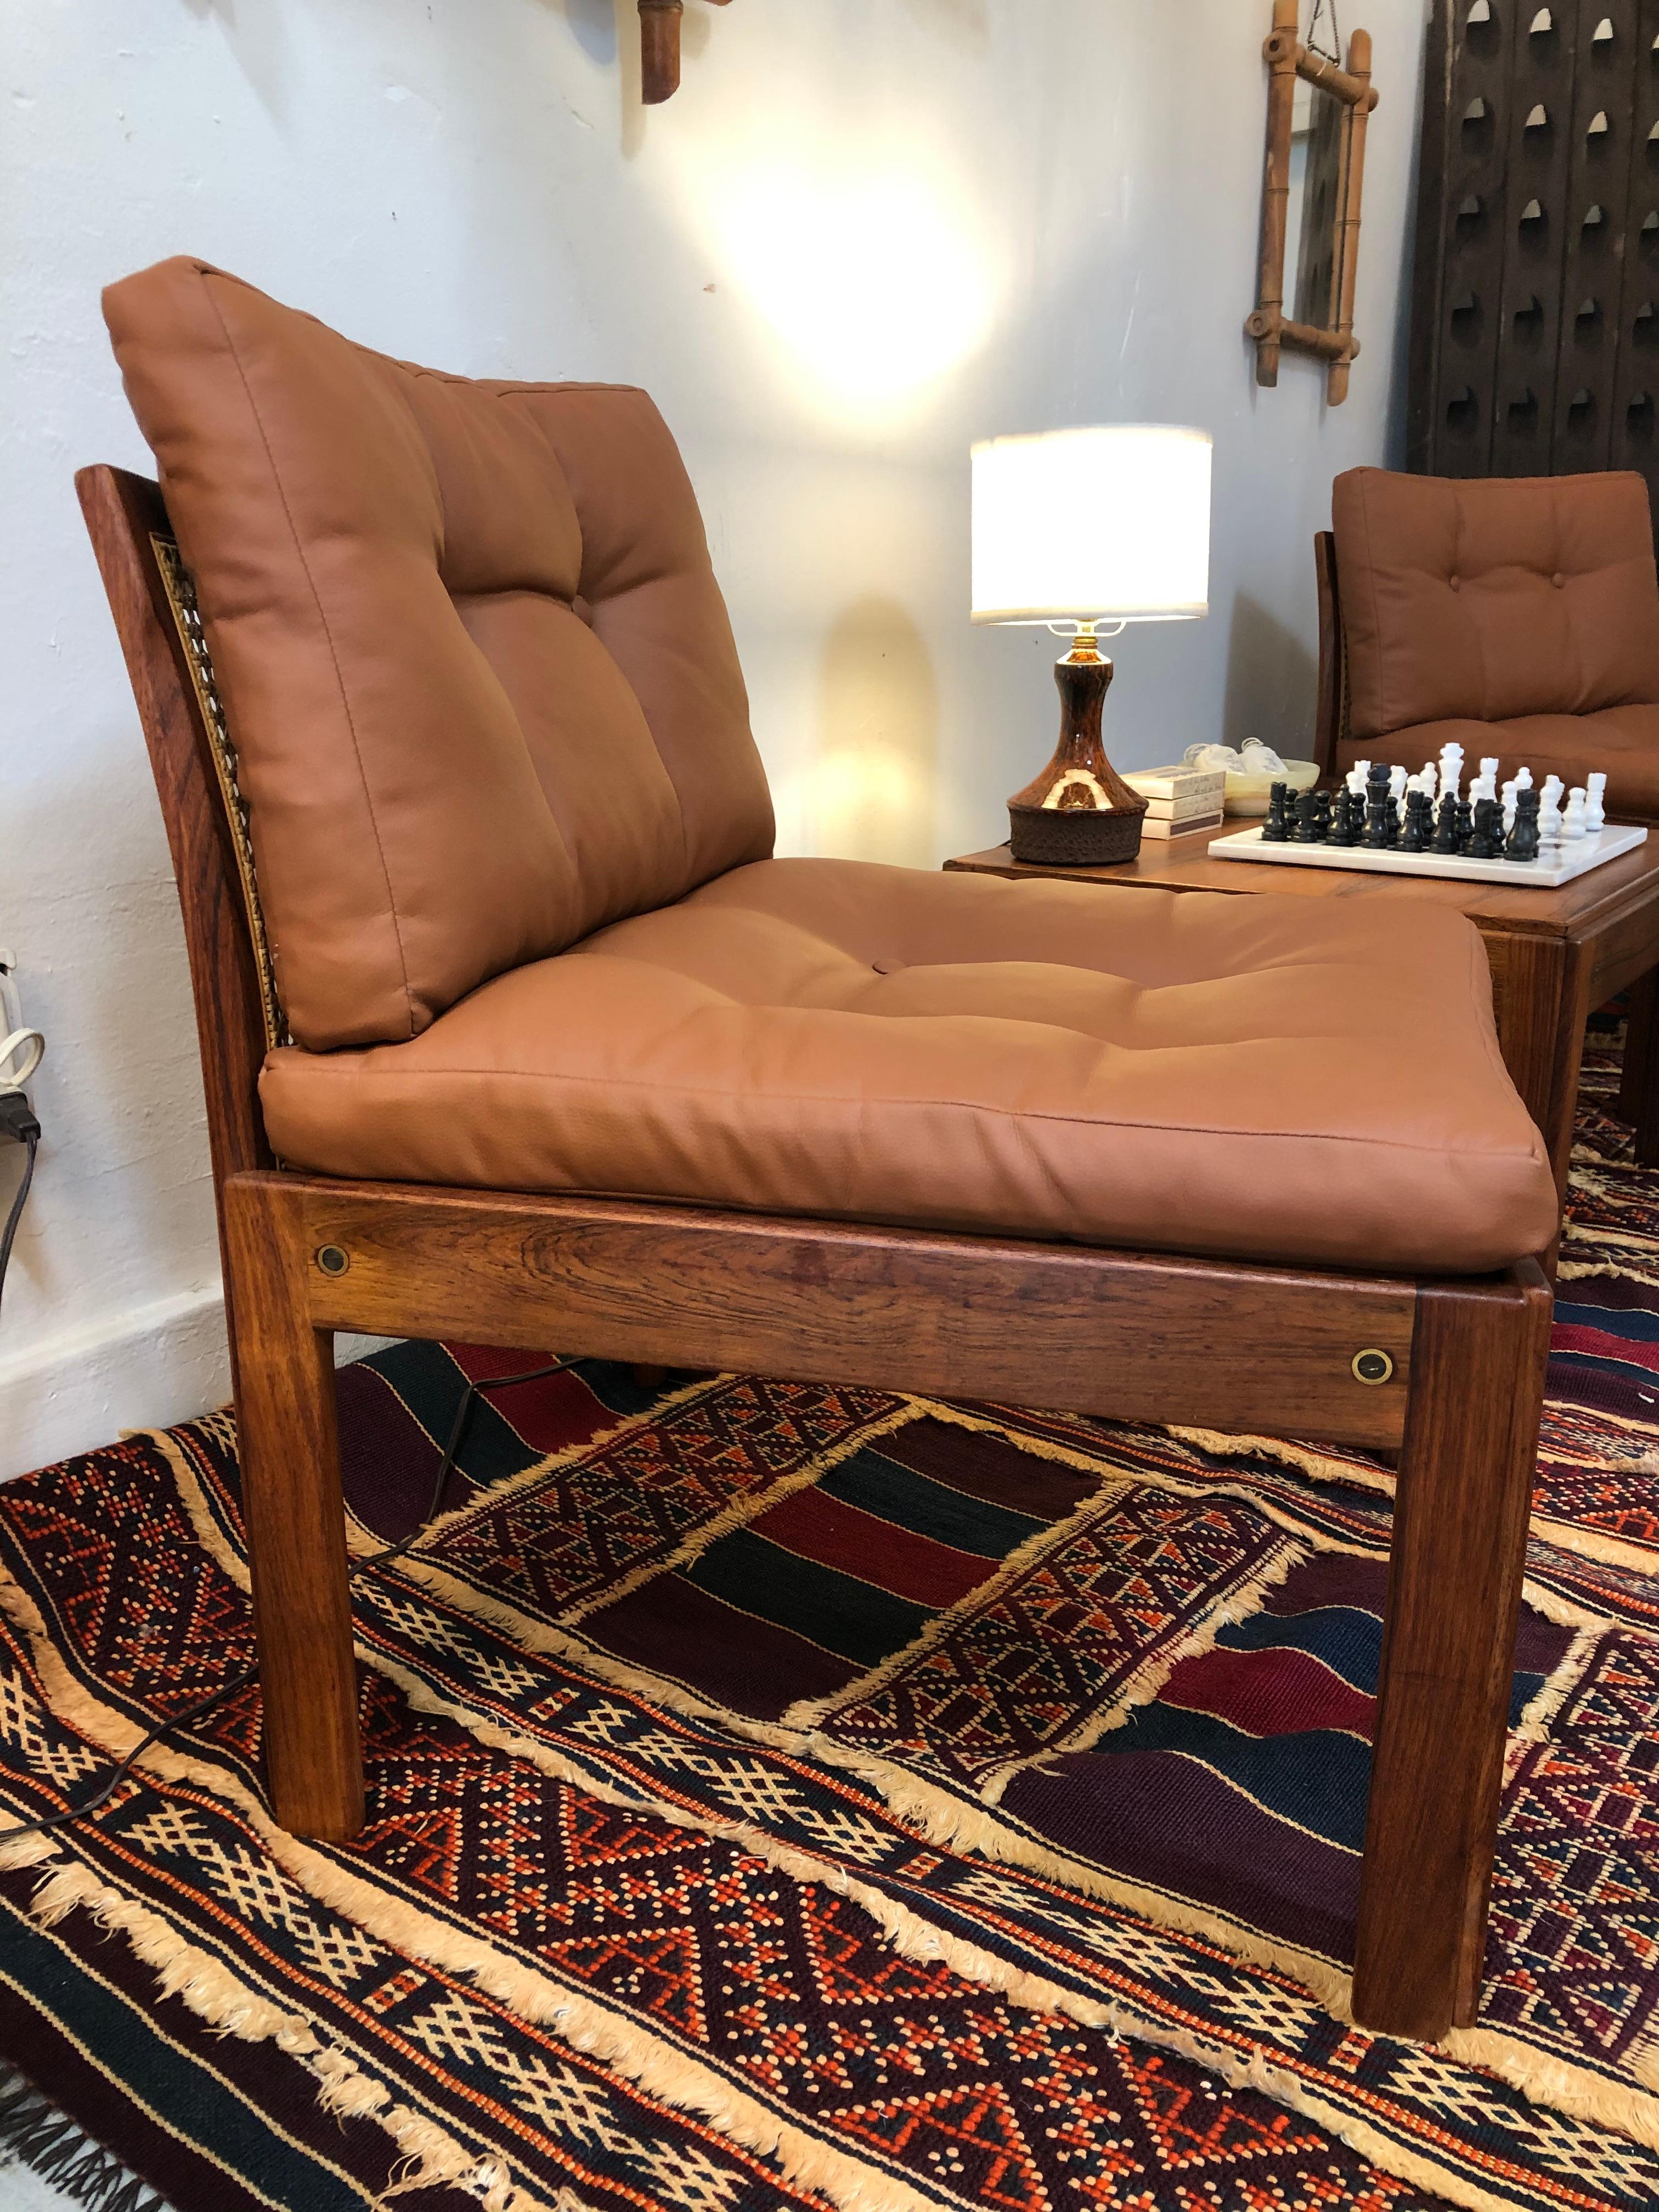 This original Danish set, designed by Johannes Andersen for CFC Silkeborg, is in mint condition from the 1960s. Chairs are made in teak wood with rattan seat backs. Fitted with soft tufted leather seat cushions. The table with this set is also made